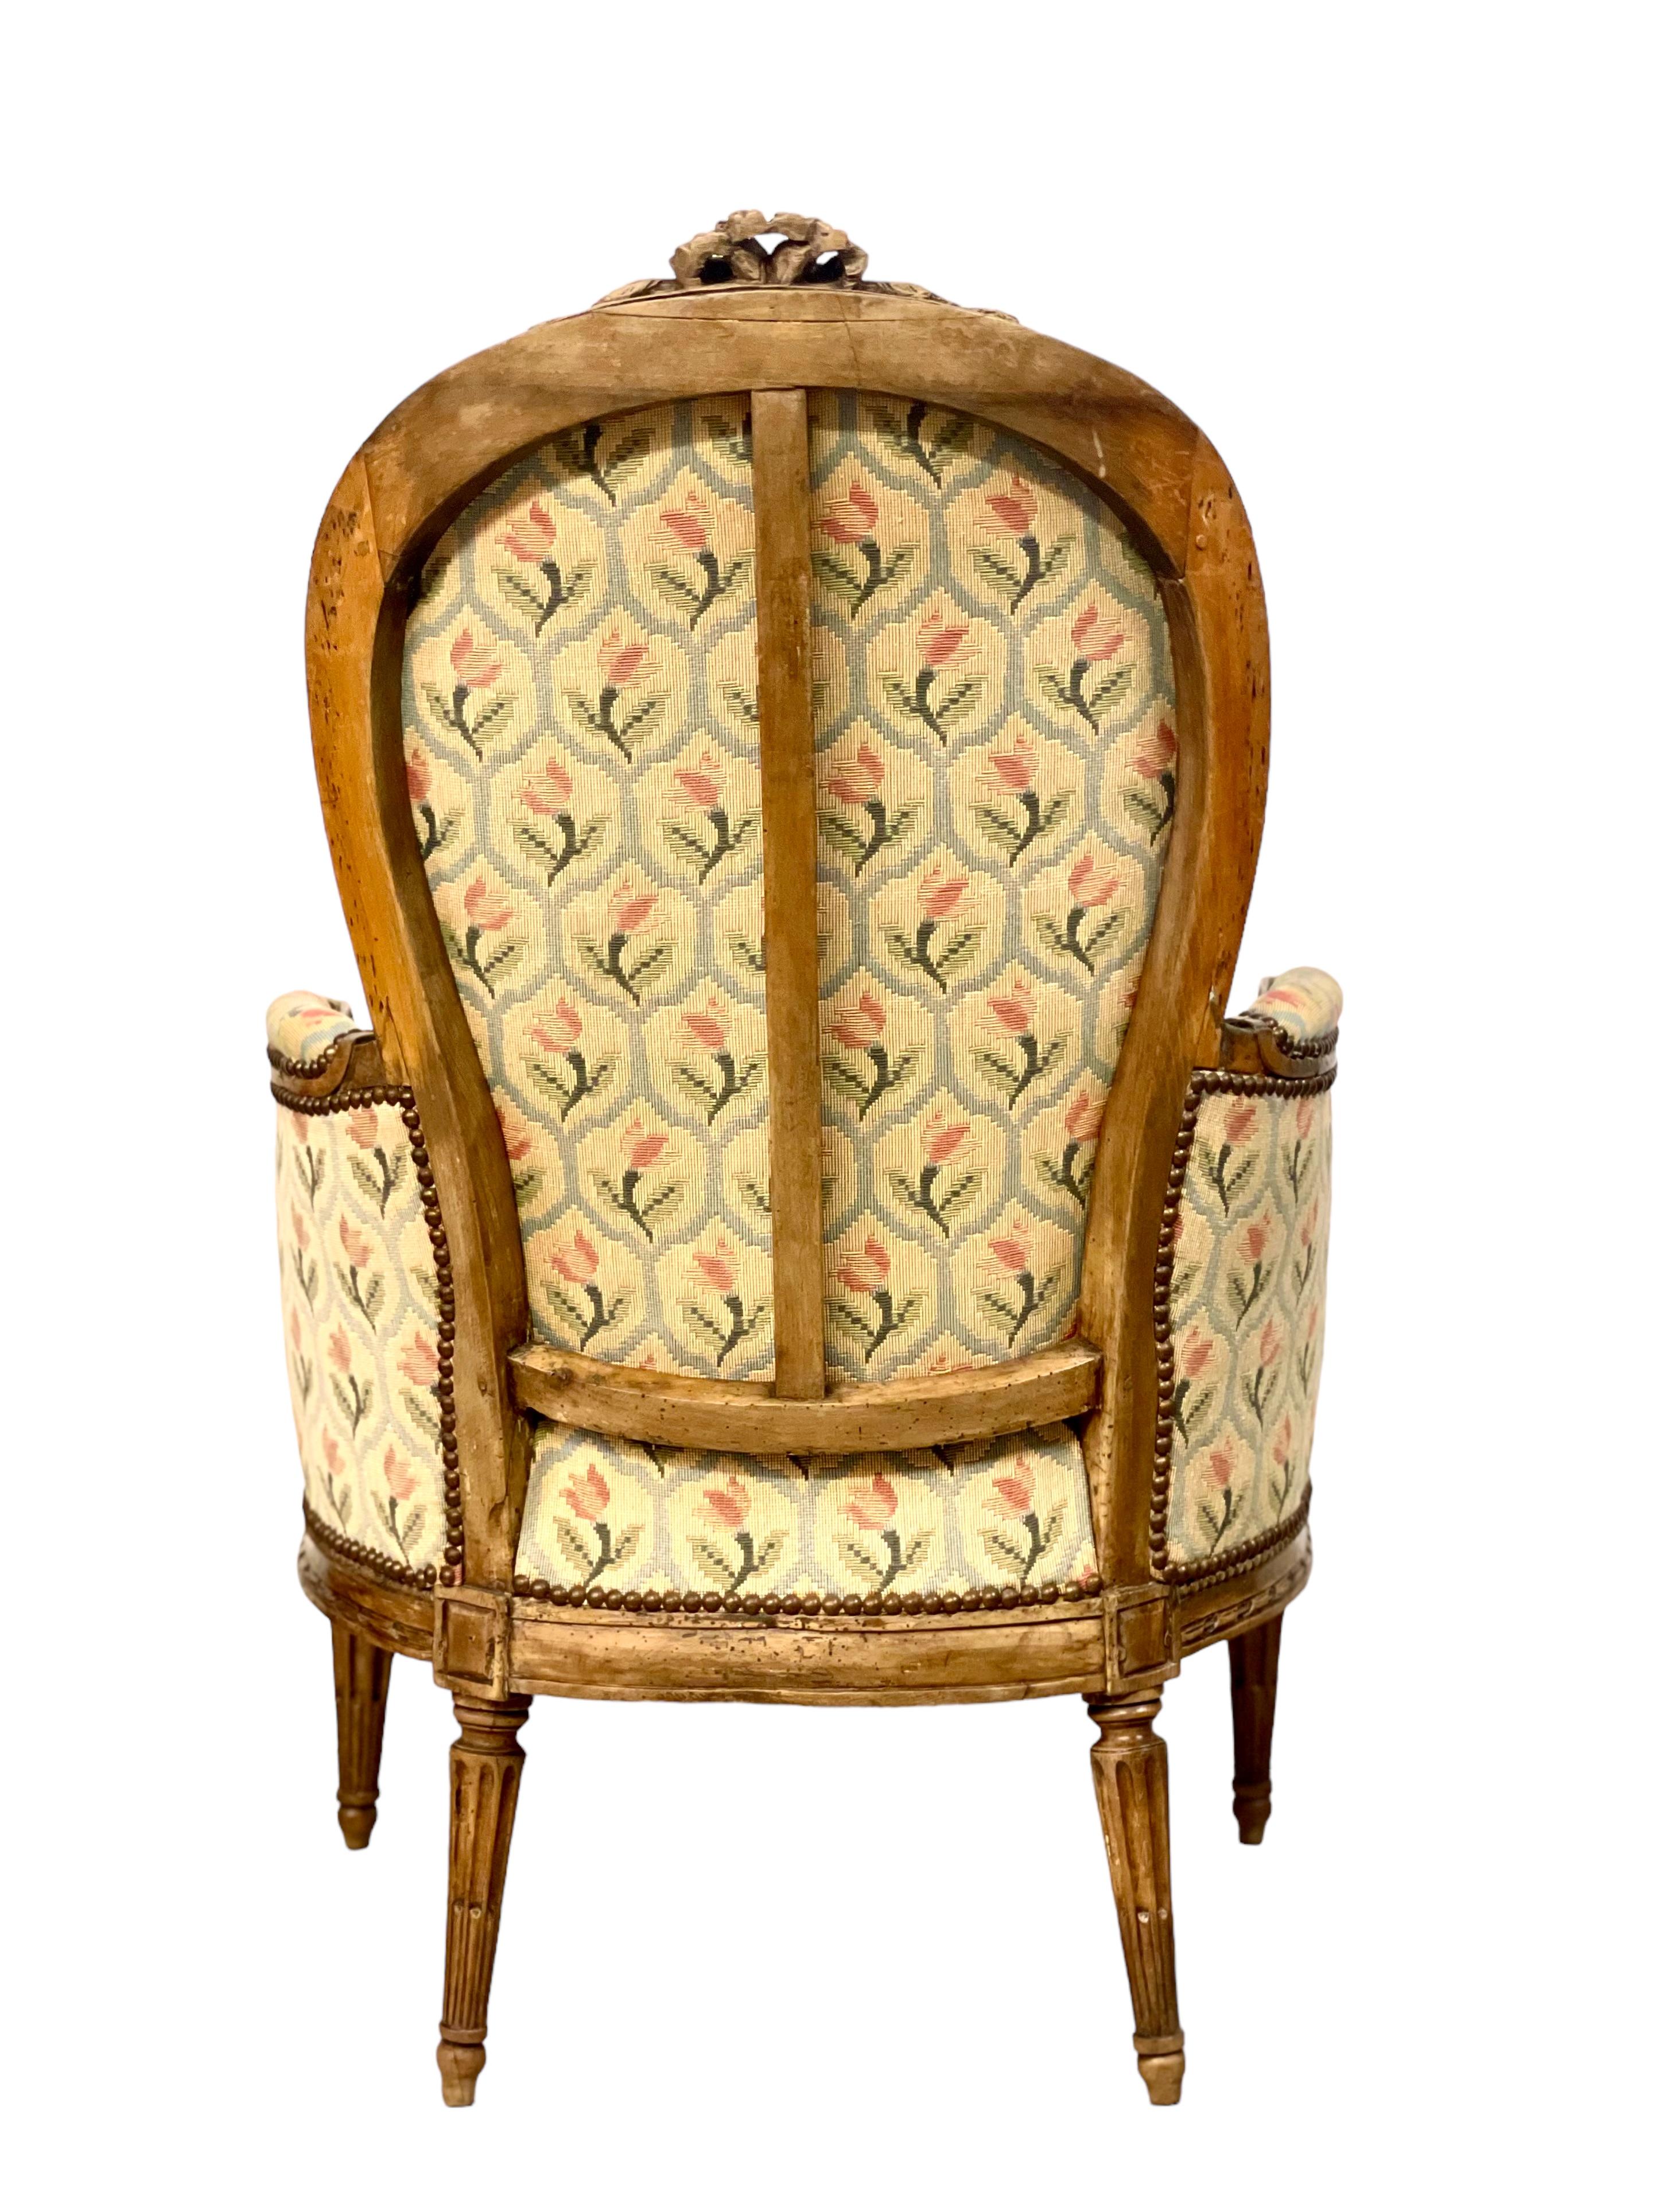 Hand-Carved Louis XVI Period Bergere Chair 18th Century  For Sale